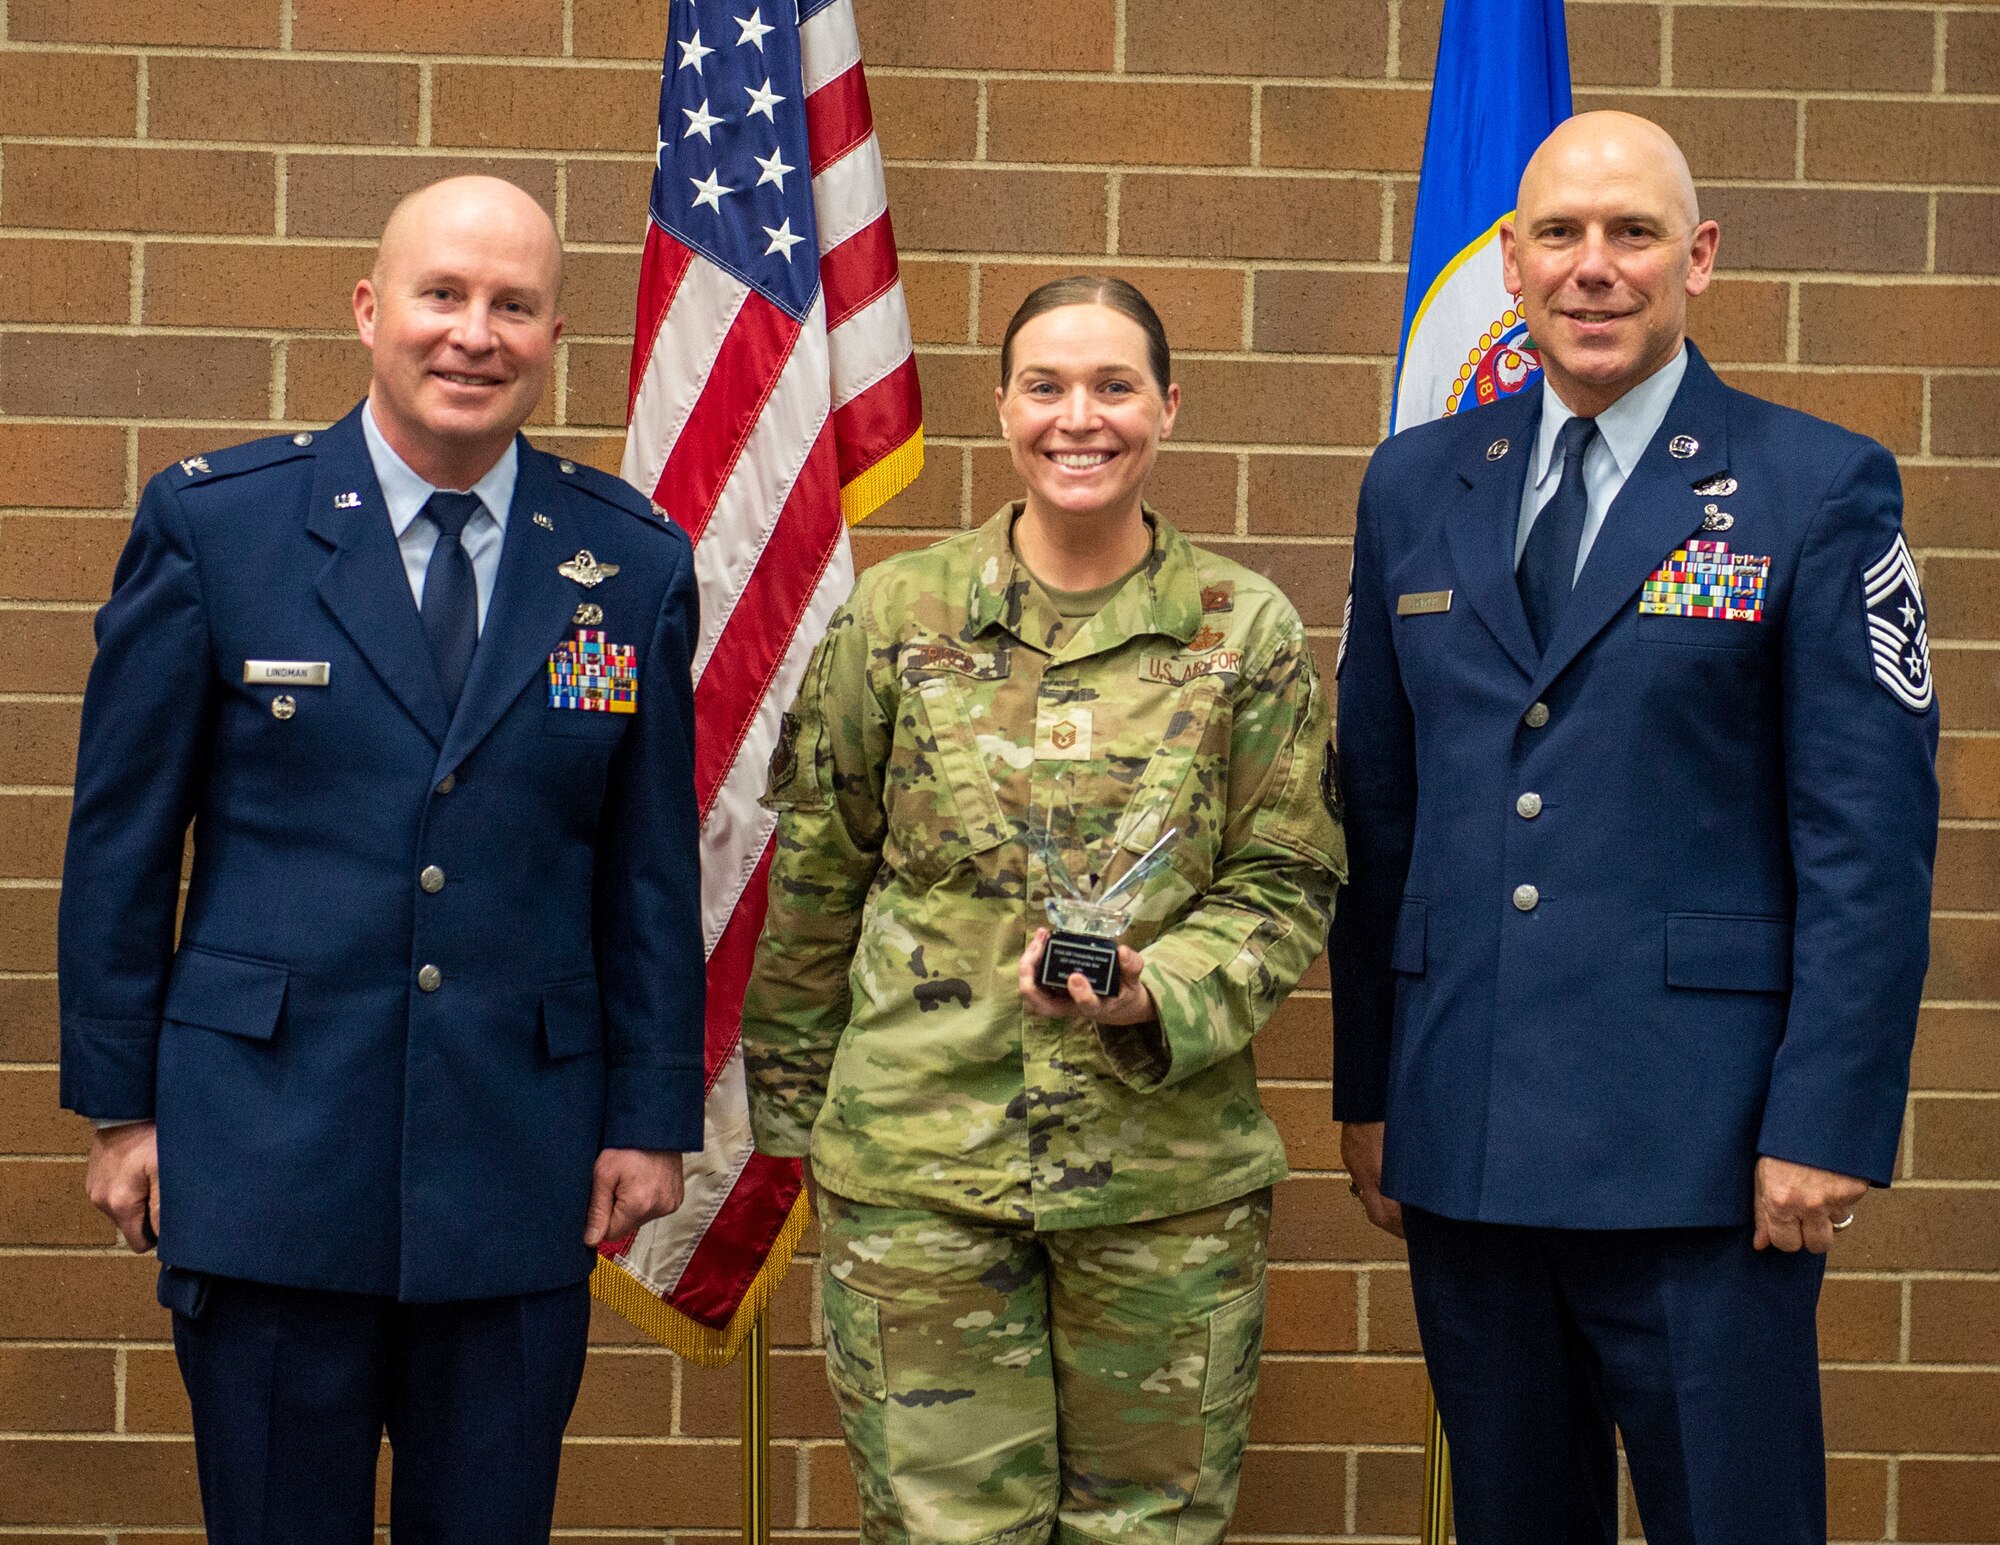 U.S. Air Force Master Sgt. Allison Trisco, 133rd Force Support Squadron, accepts the Outstanding Airman of the Year award for Master Sgt. Shane Trisco in St. Paul, Minn., Dec. 11, 2021.